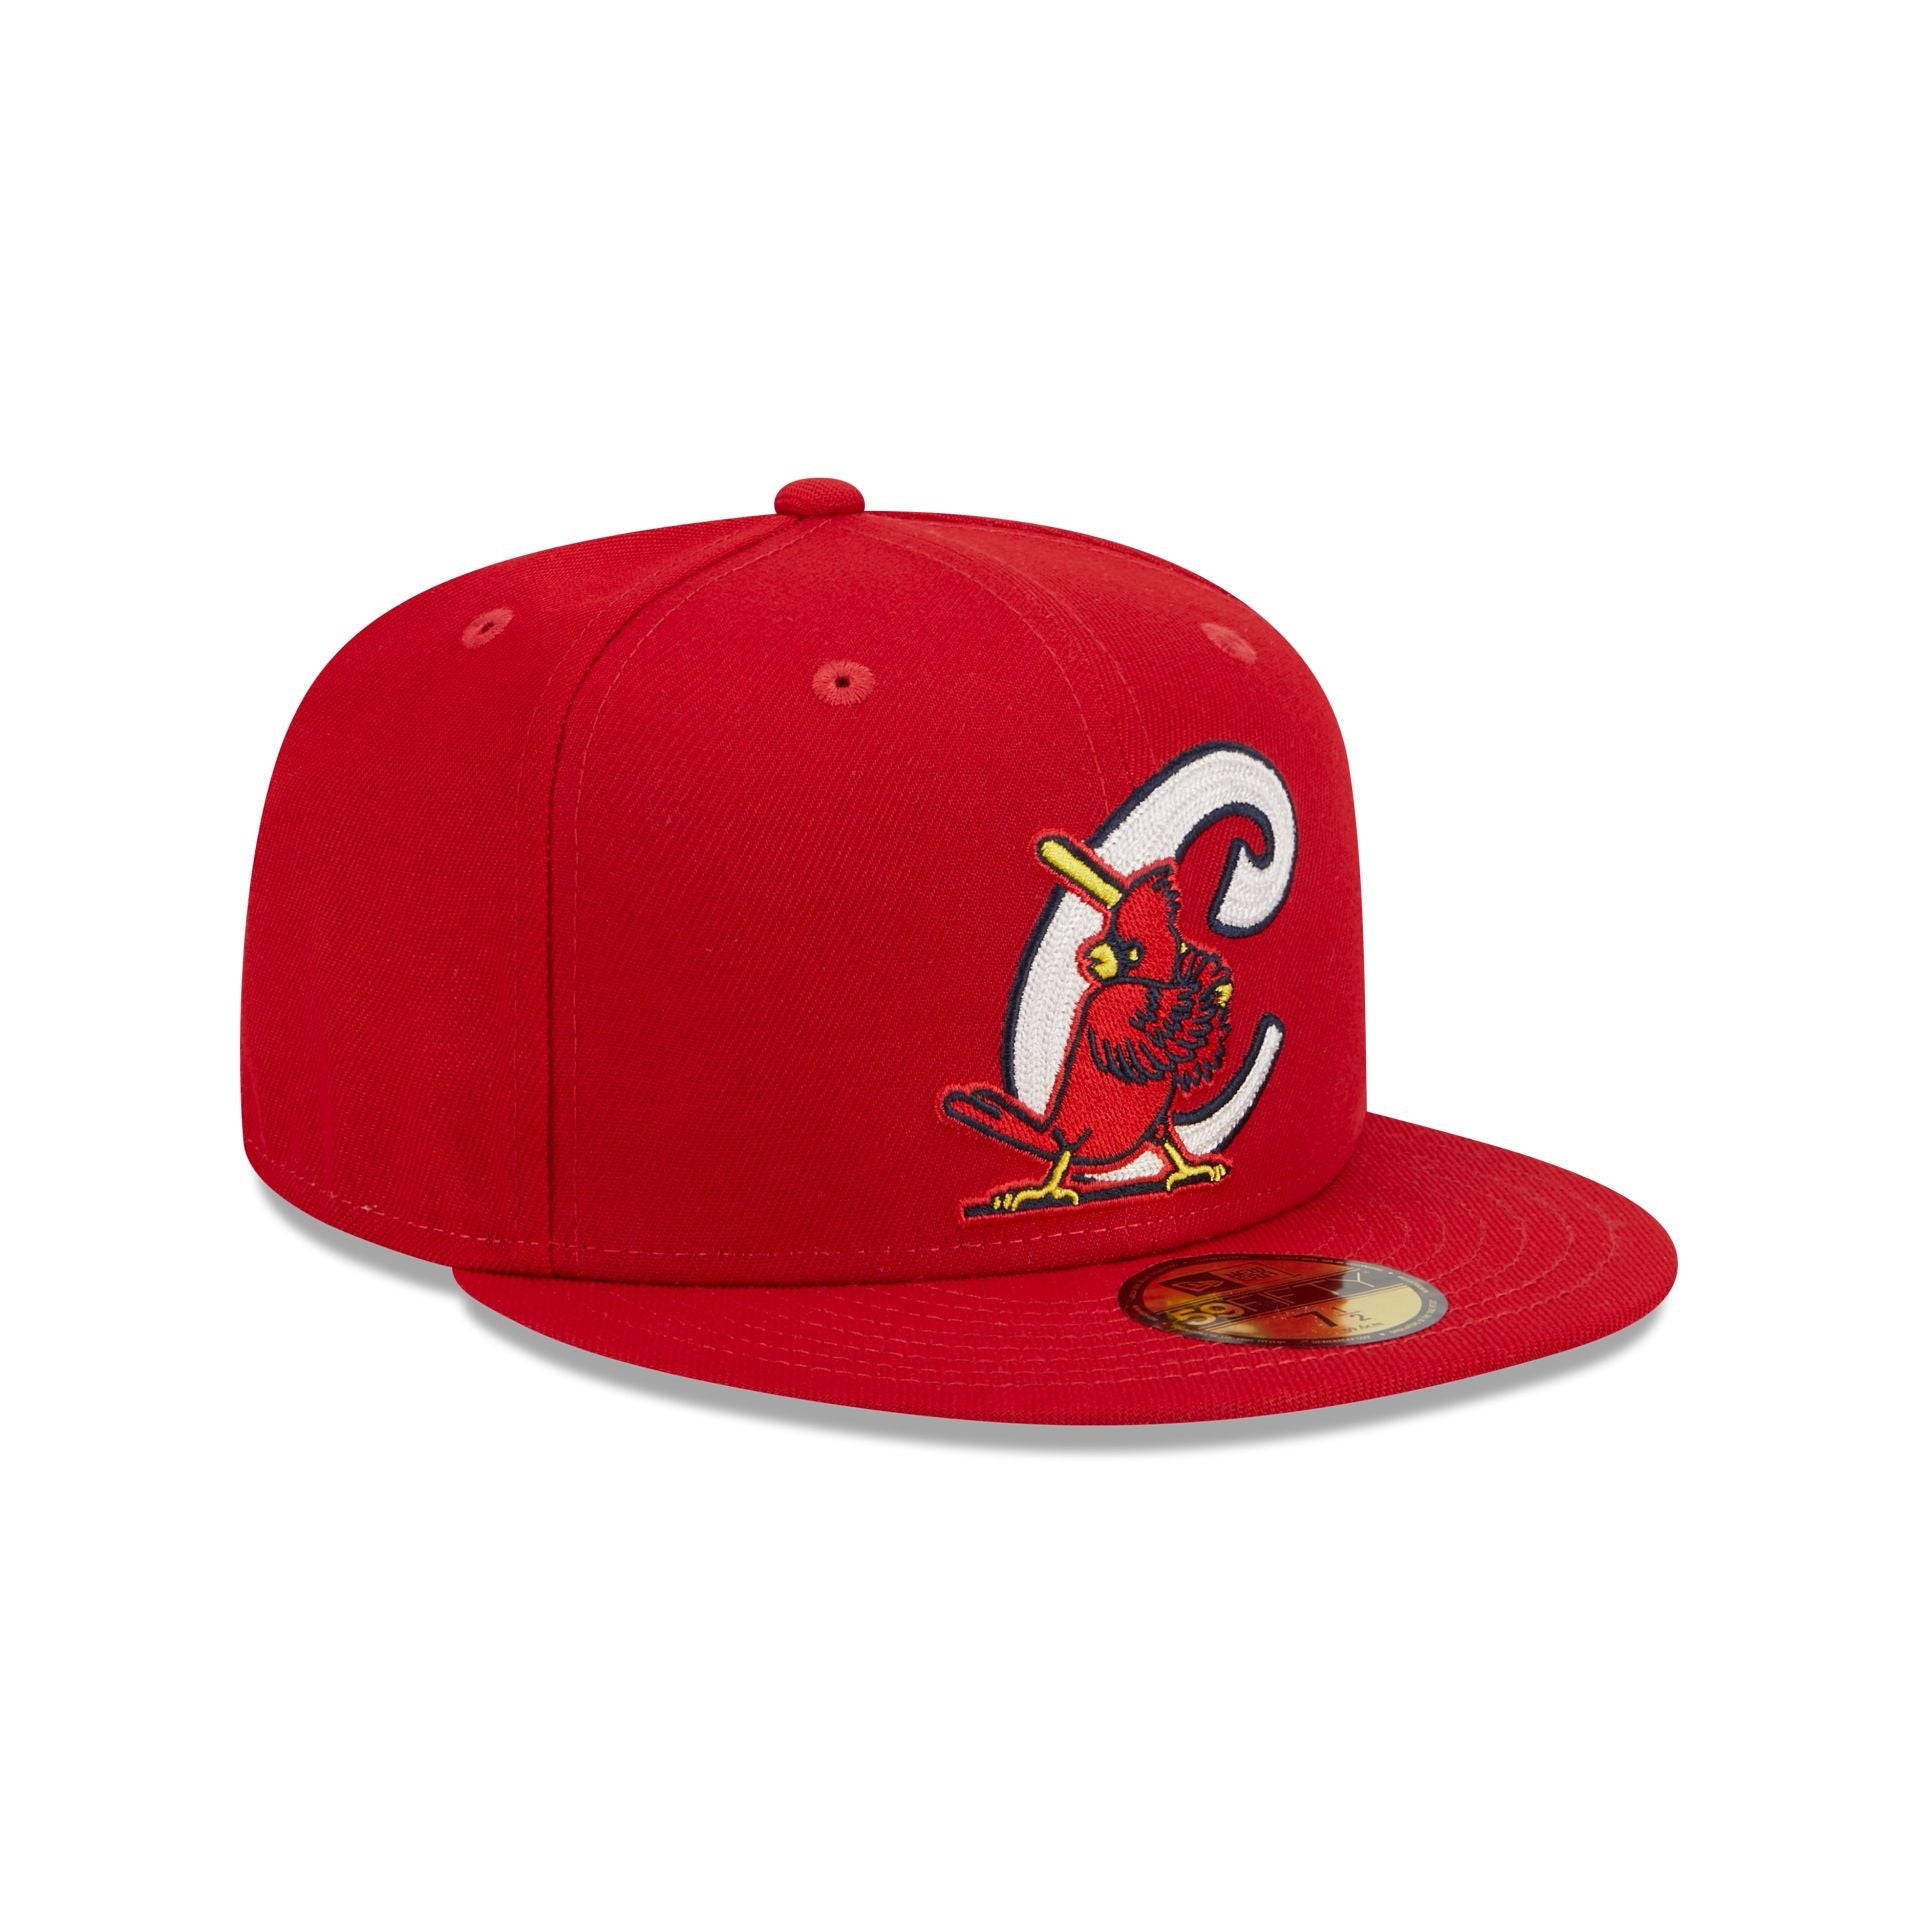 St. Louis Cardinals Duo Logo 59FIFTY Fitted Hat, Red - Size: 7 7/8, MLB by New Era